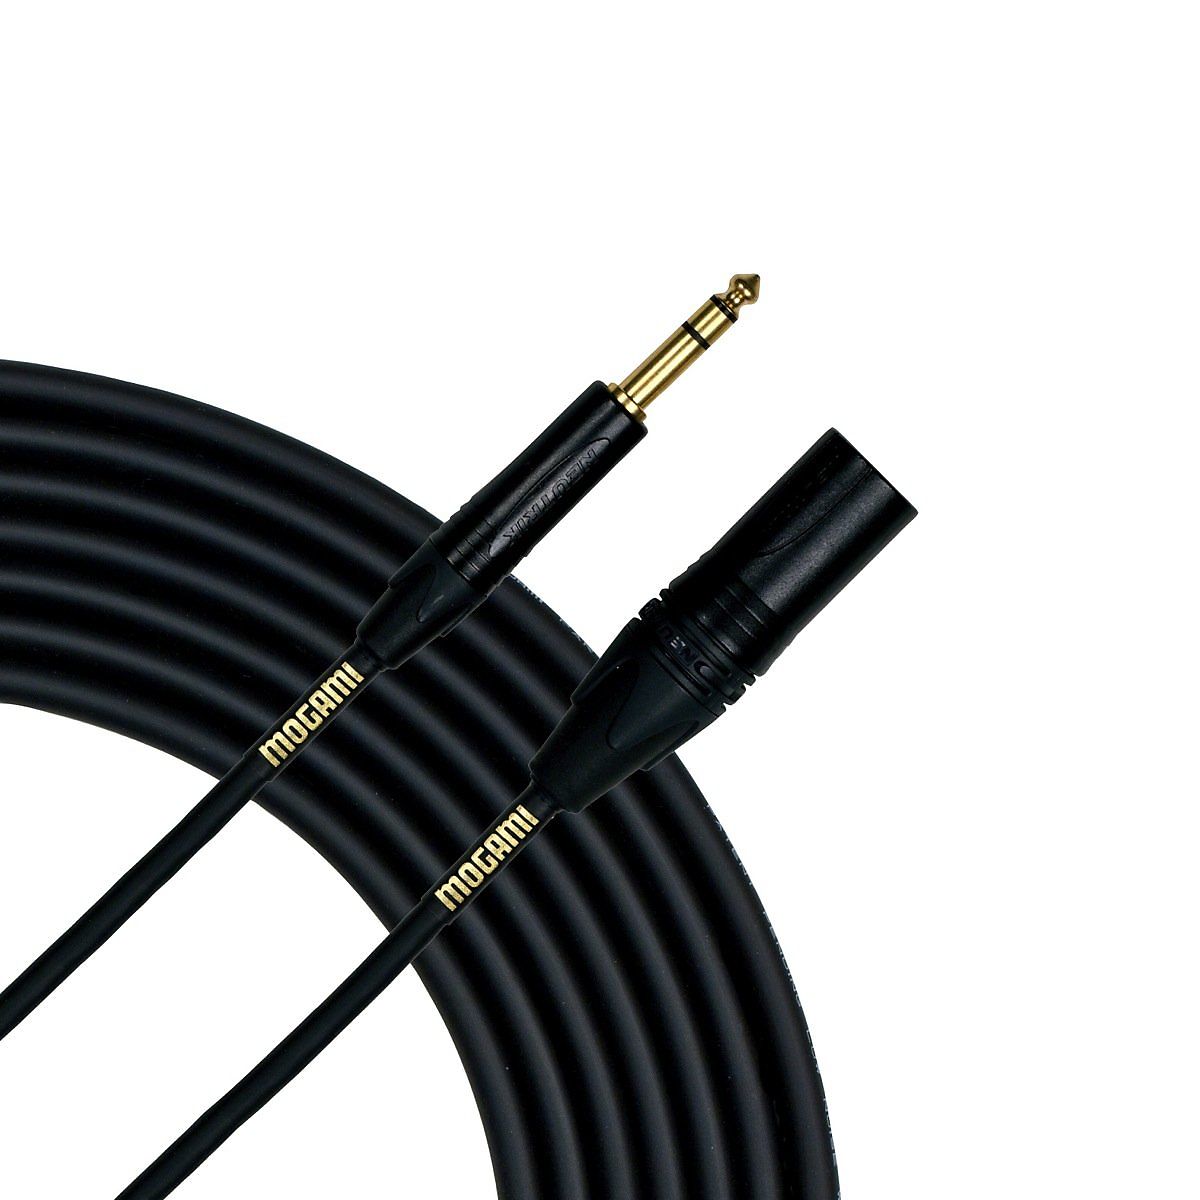 Mogami Gold 1/4 Inch TRS to XLR Male Cable, TRSXLRM-10, 10 Foot